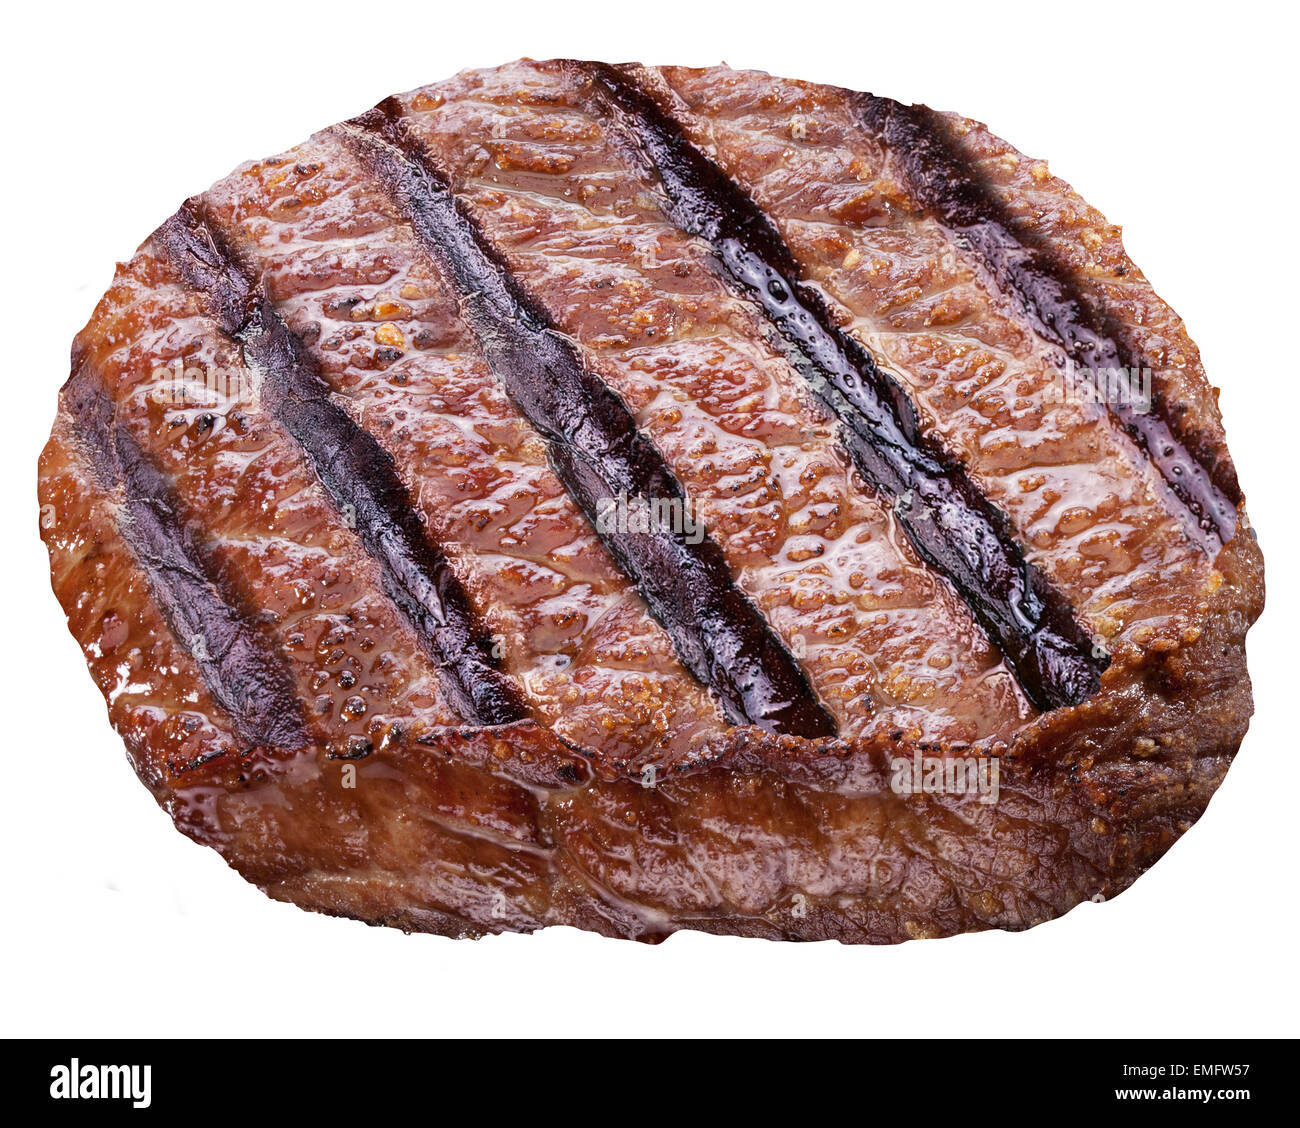 Beef steak isolated on a white background. File contains clipping paths. Stock Photo